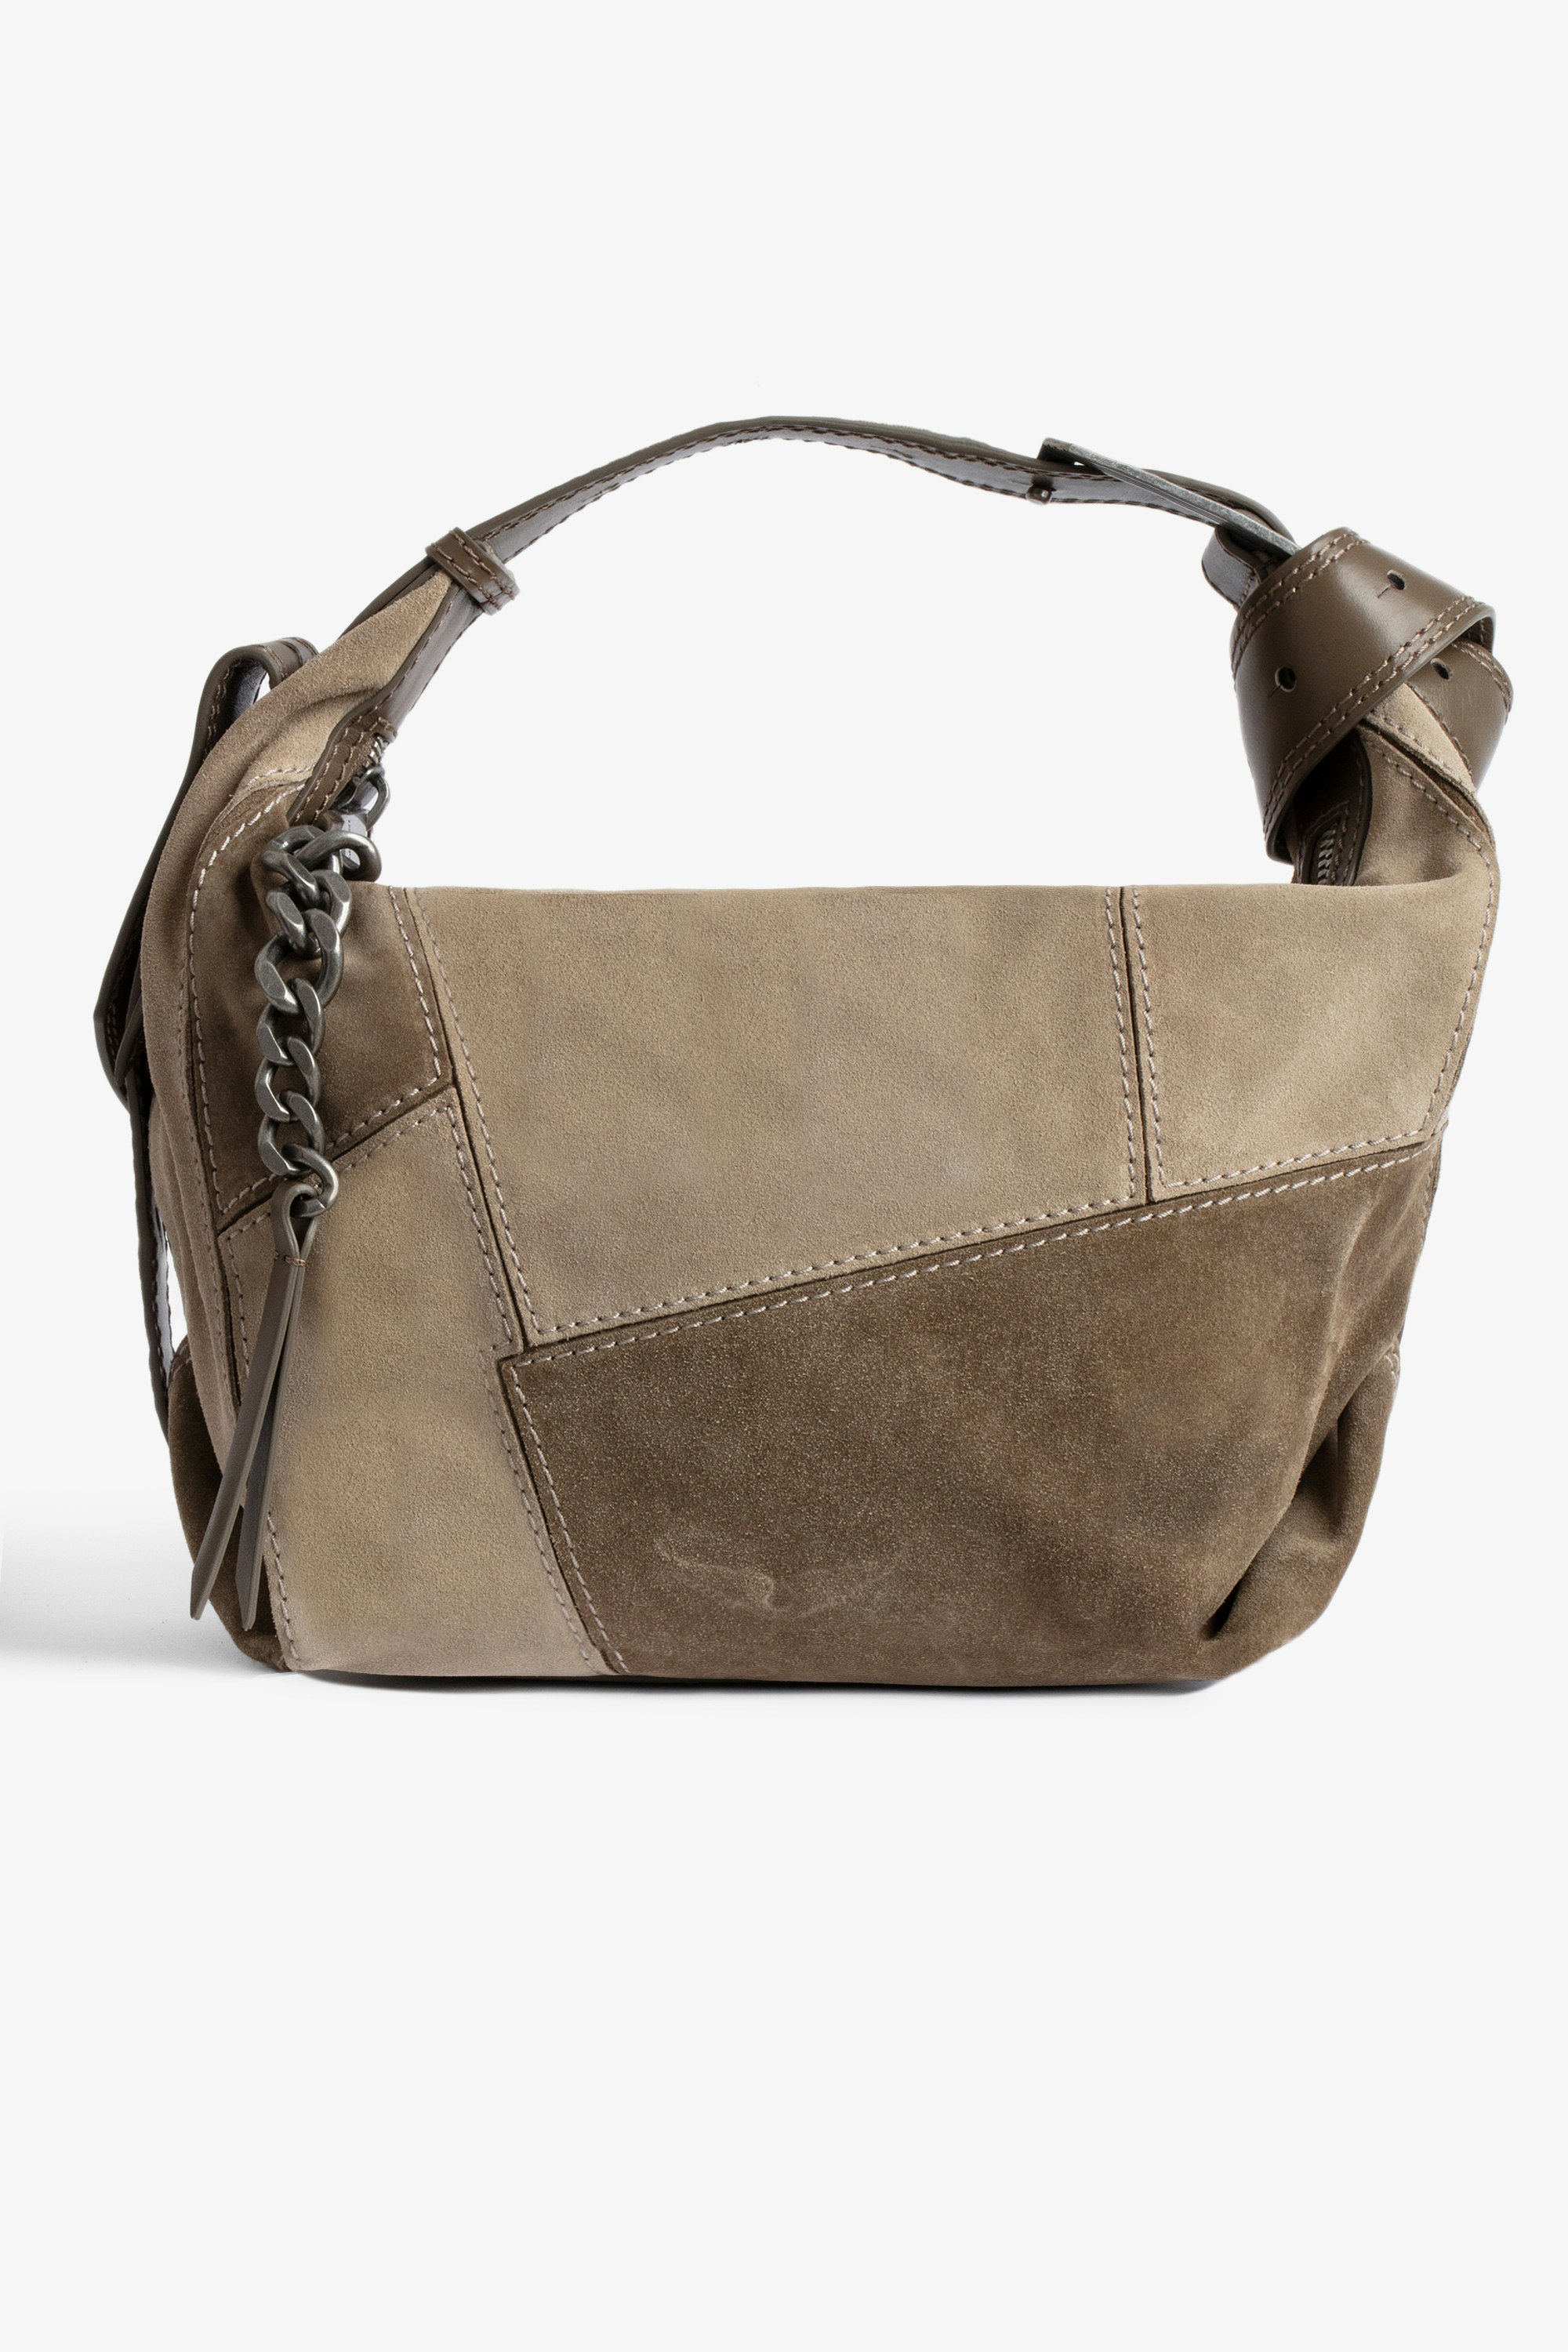 Le Cecilia Suede Patchwork Bag Women’s bag worn over the shoulder or across the body in patchwork of beige suede